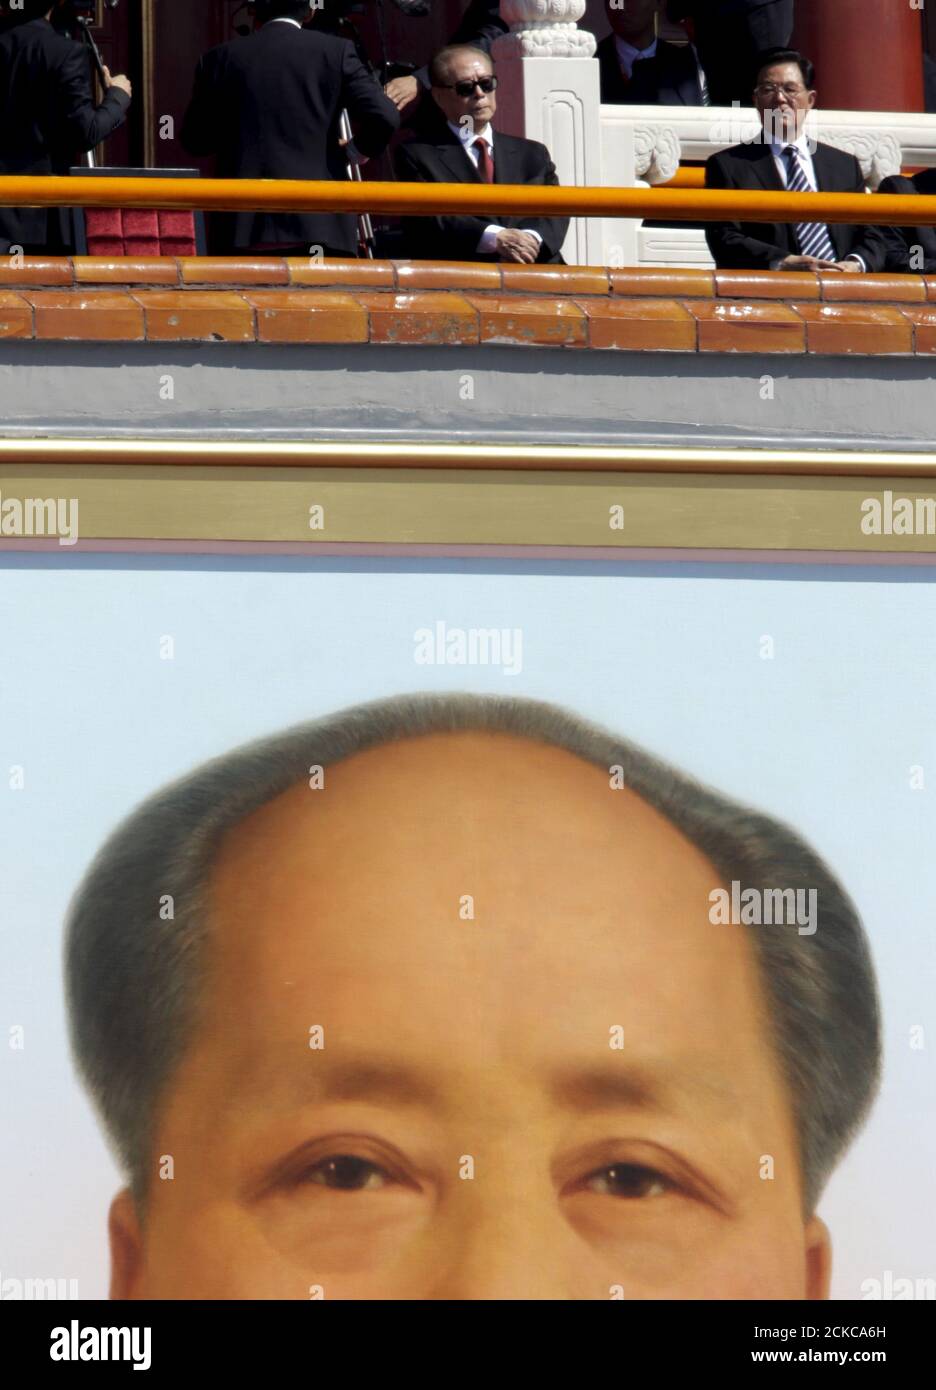 Former Chinese Presidents Jiang Zemin (L) and Hu Jintao are seen above of a portrait of late chairman Mao Zedong as they attend a military parade to mark the 70th anniversary of the end of World War Two, in Beijing, China, September 3, 2015.  REUTERS/Jason Lee Stock Photo